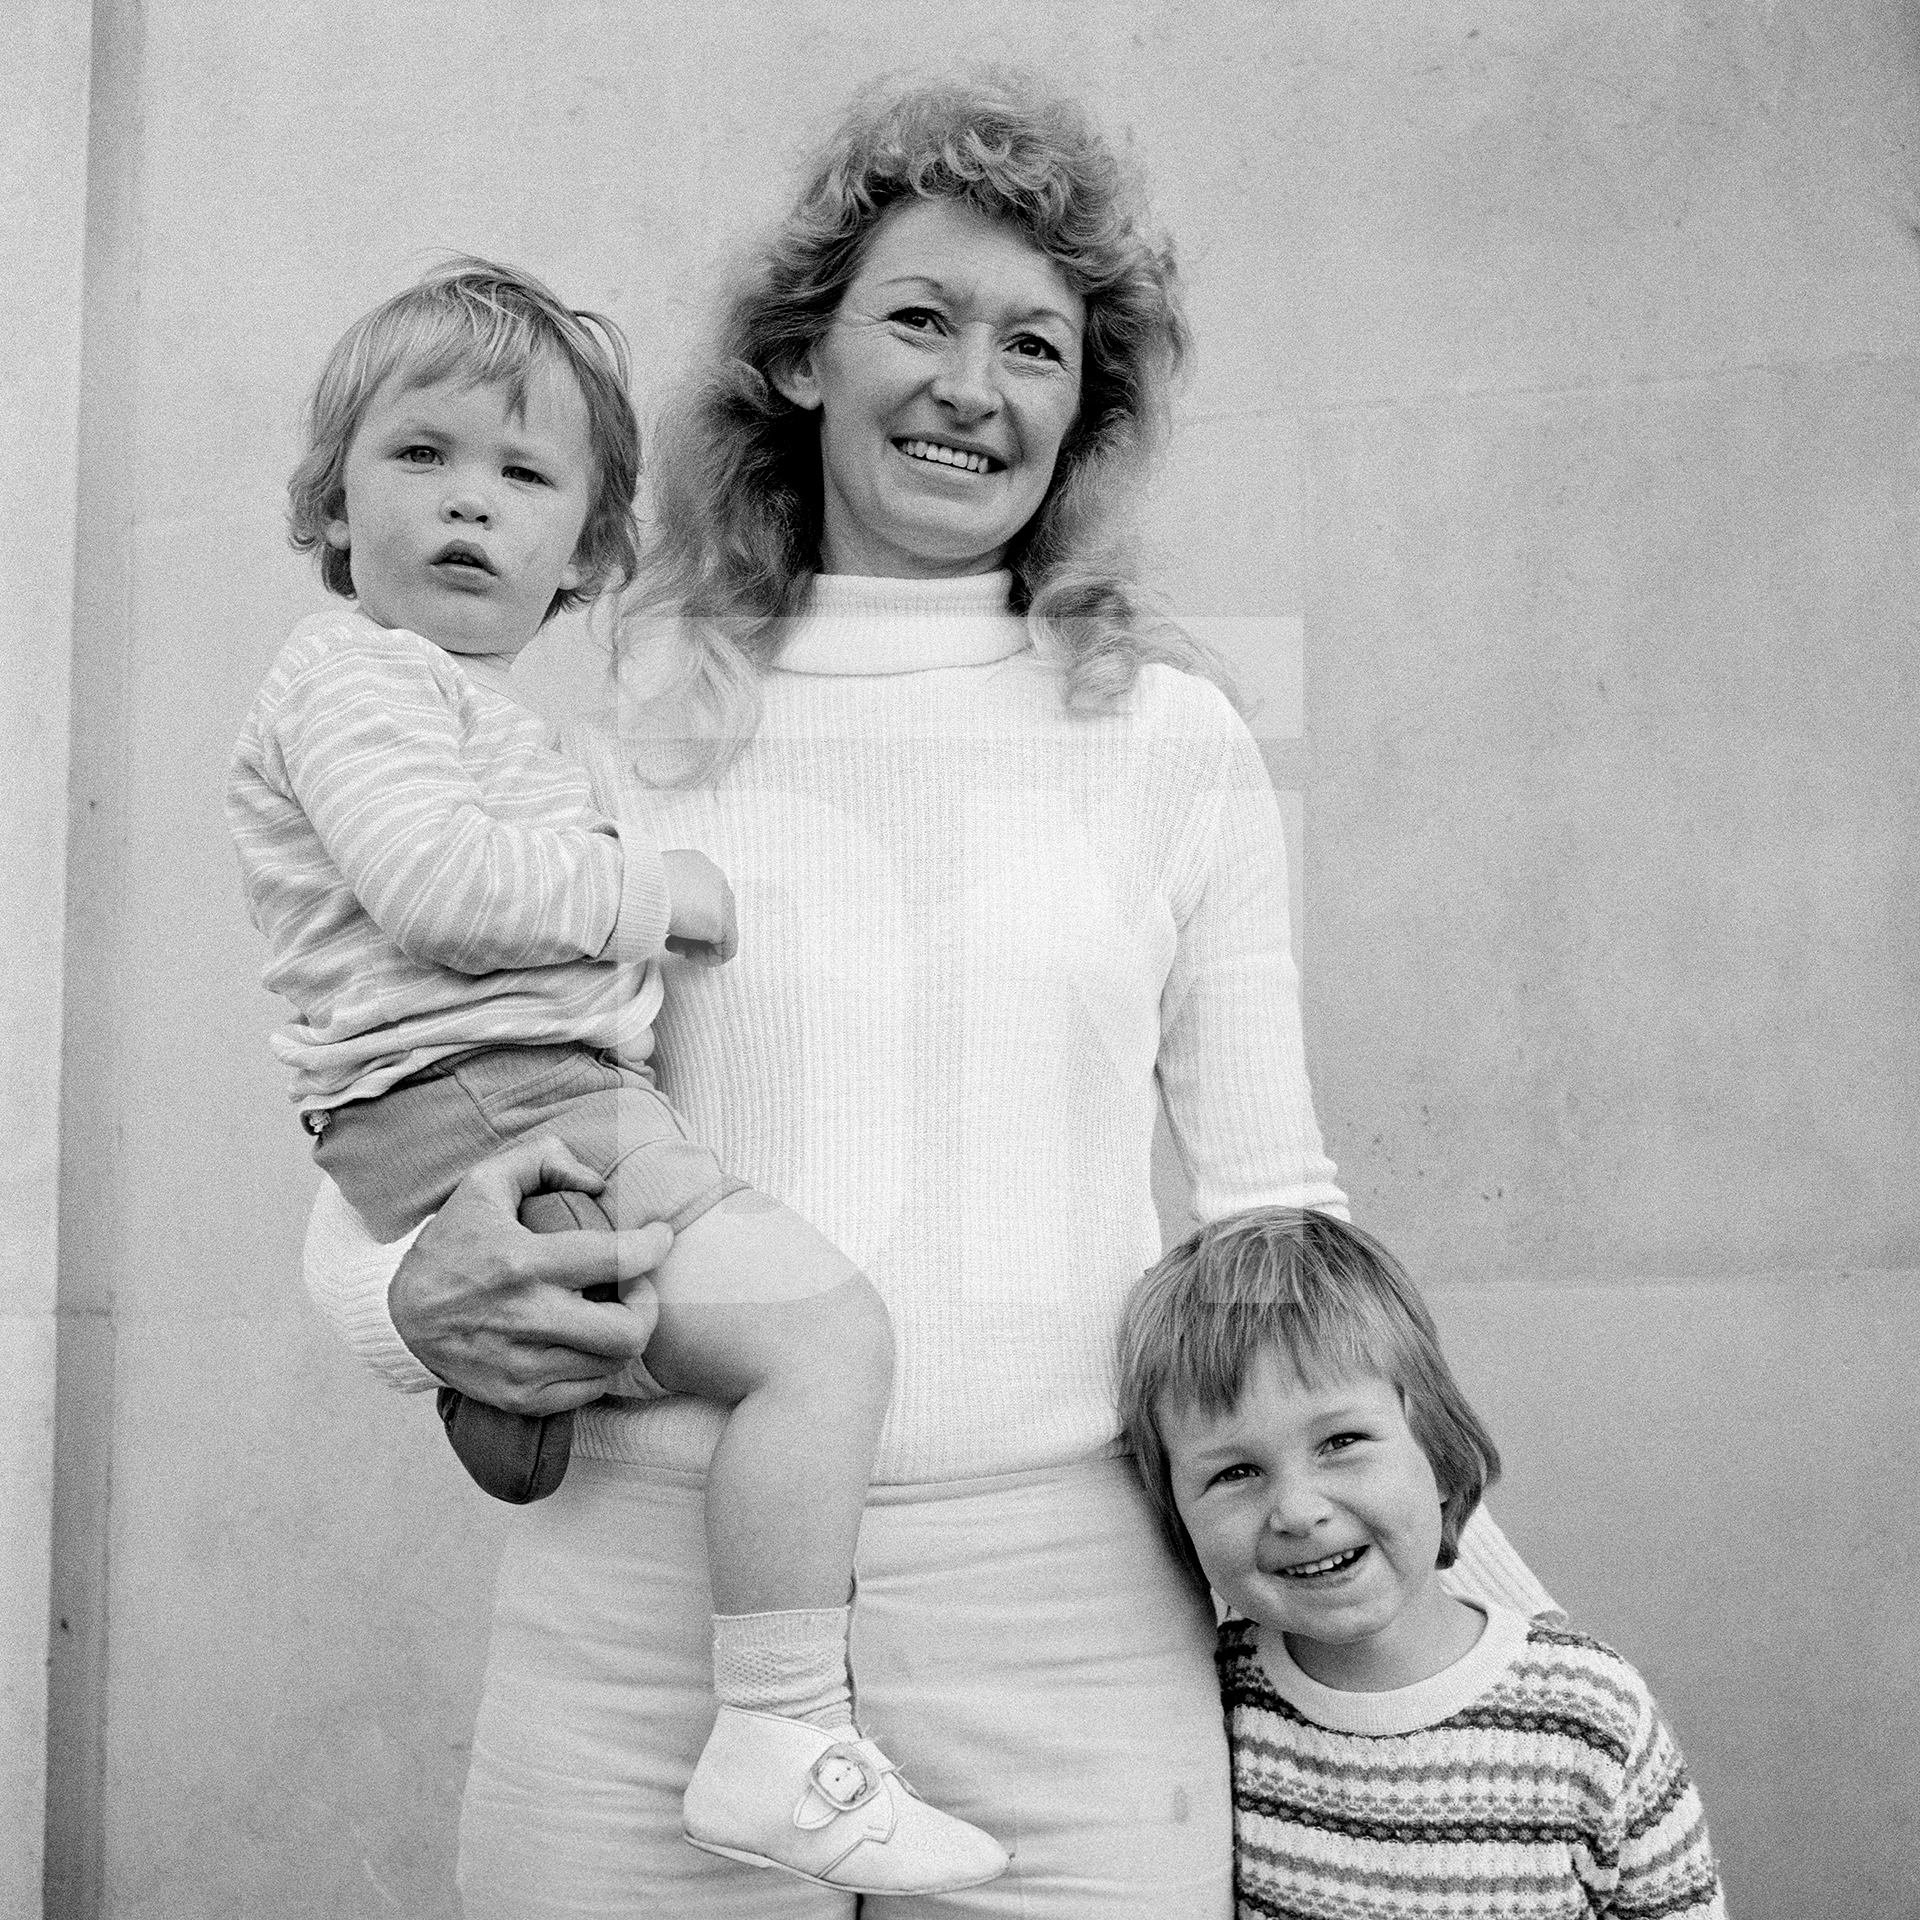 Mother and sons: left-to-right Dave, Maggie and Steve Summerton, Southampton. May 1974 by Daniel Meadows